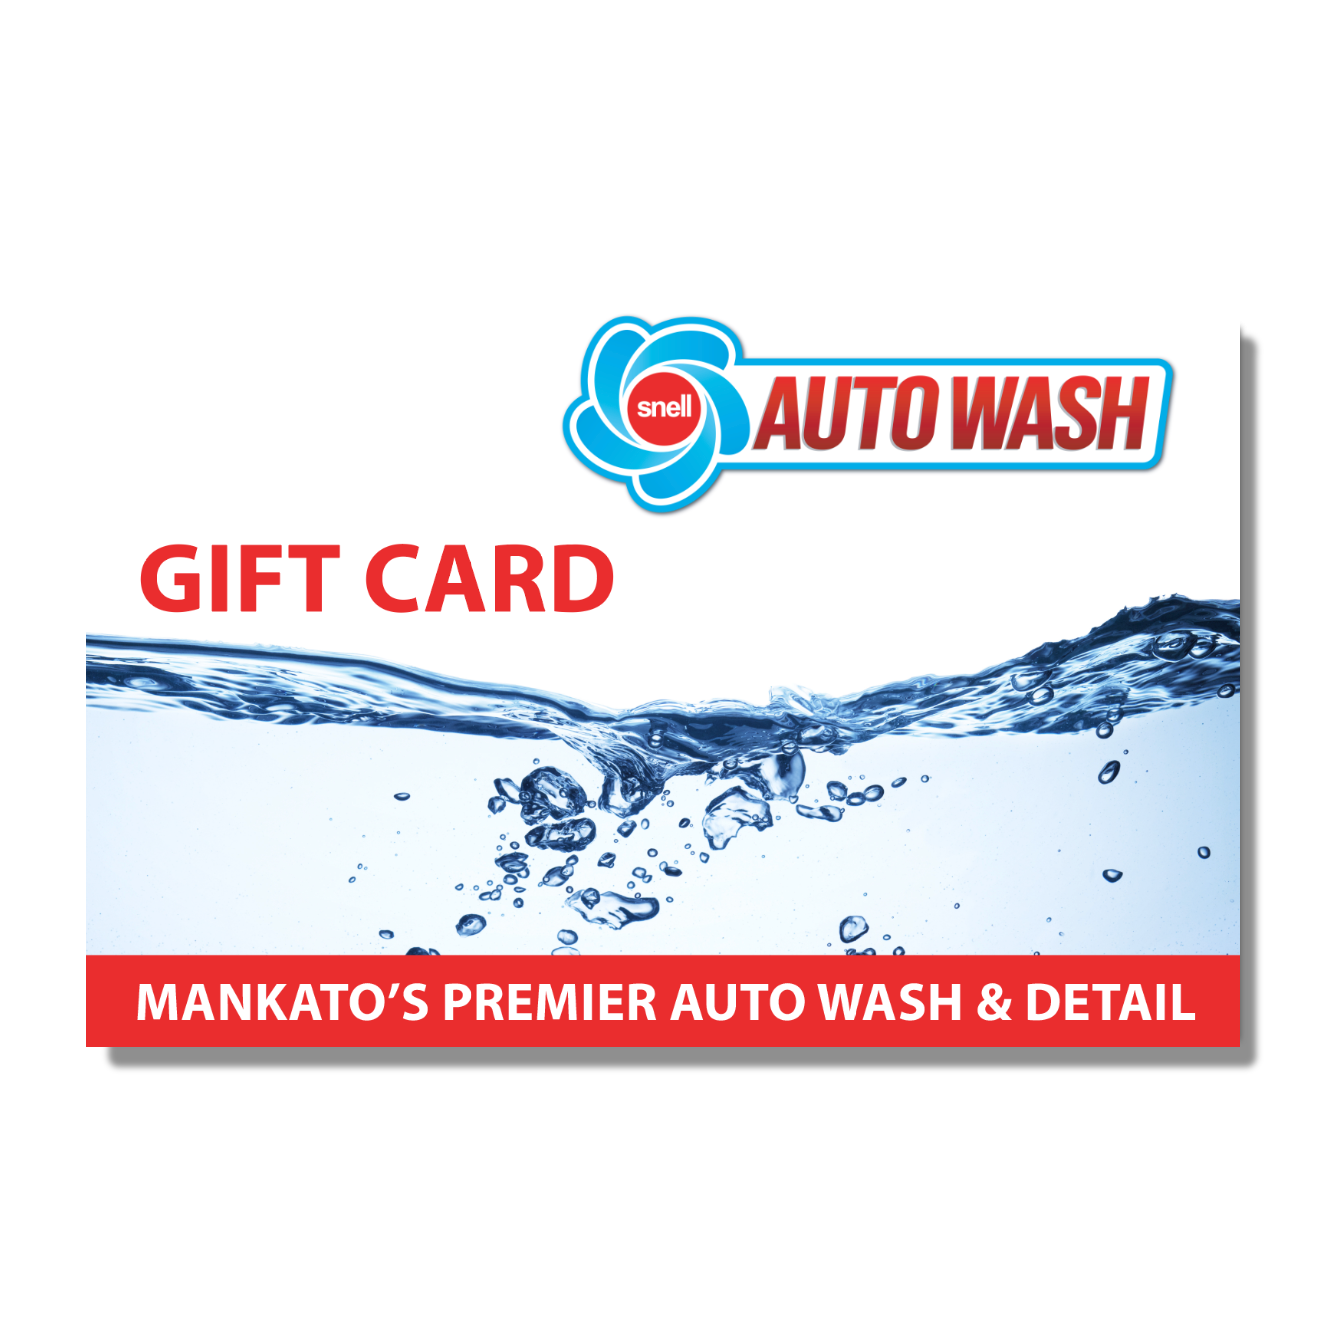 Snell Auto Wash Gift Card $50